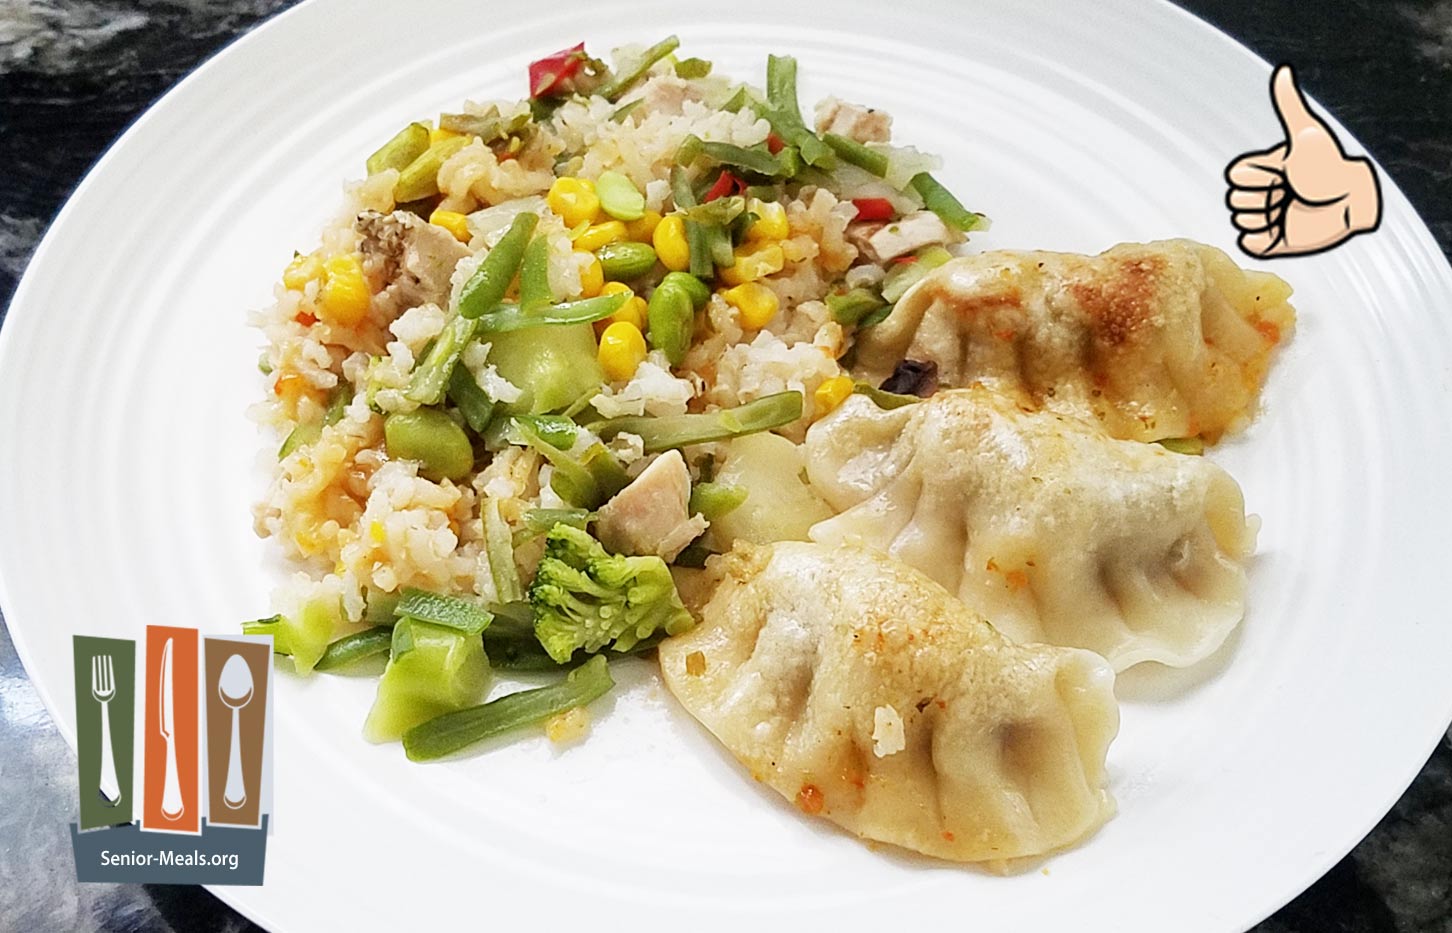 MK Signature Meal - Pork Pot stickers with Stir-Fry Vegetables and Chicken Fried Brown Rice - $13